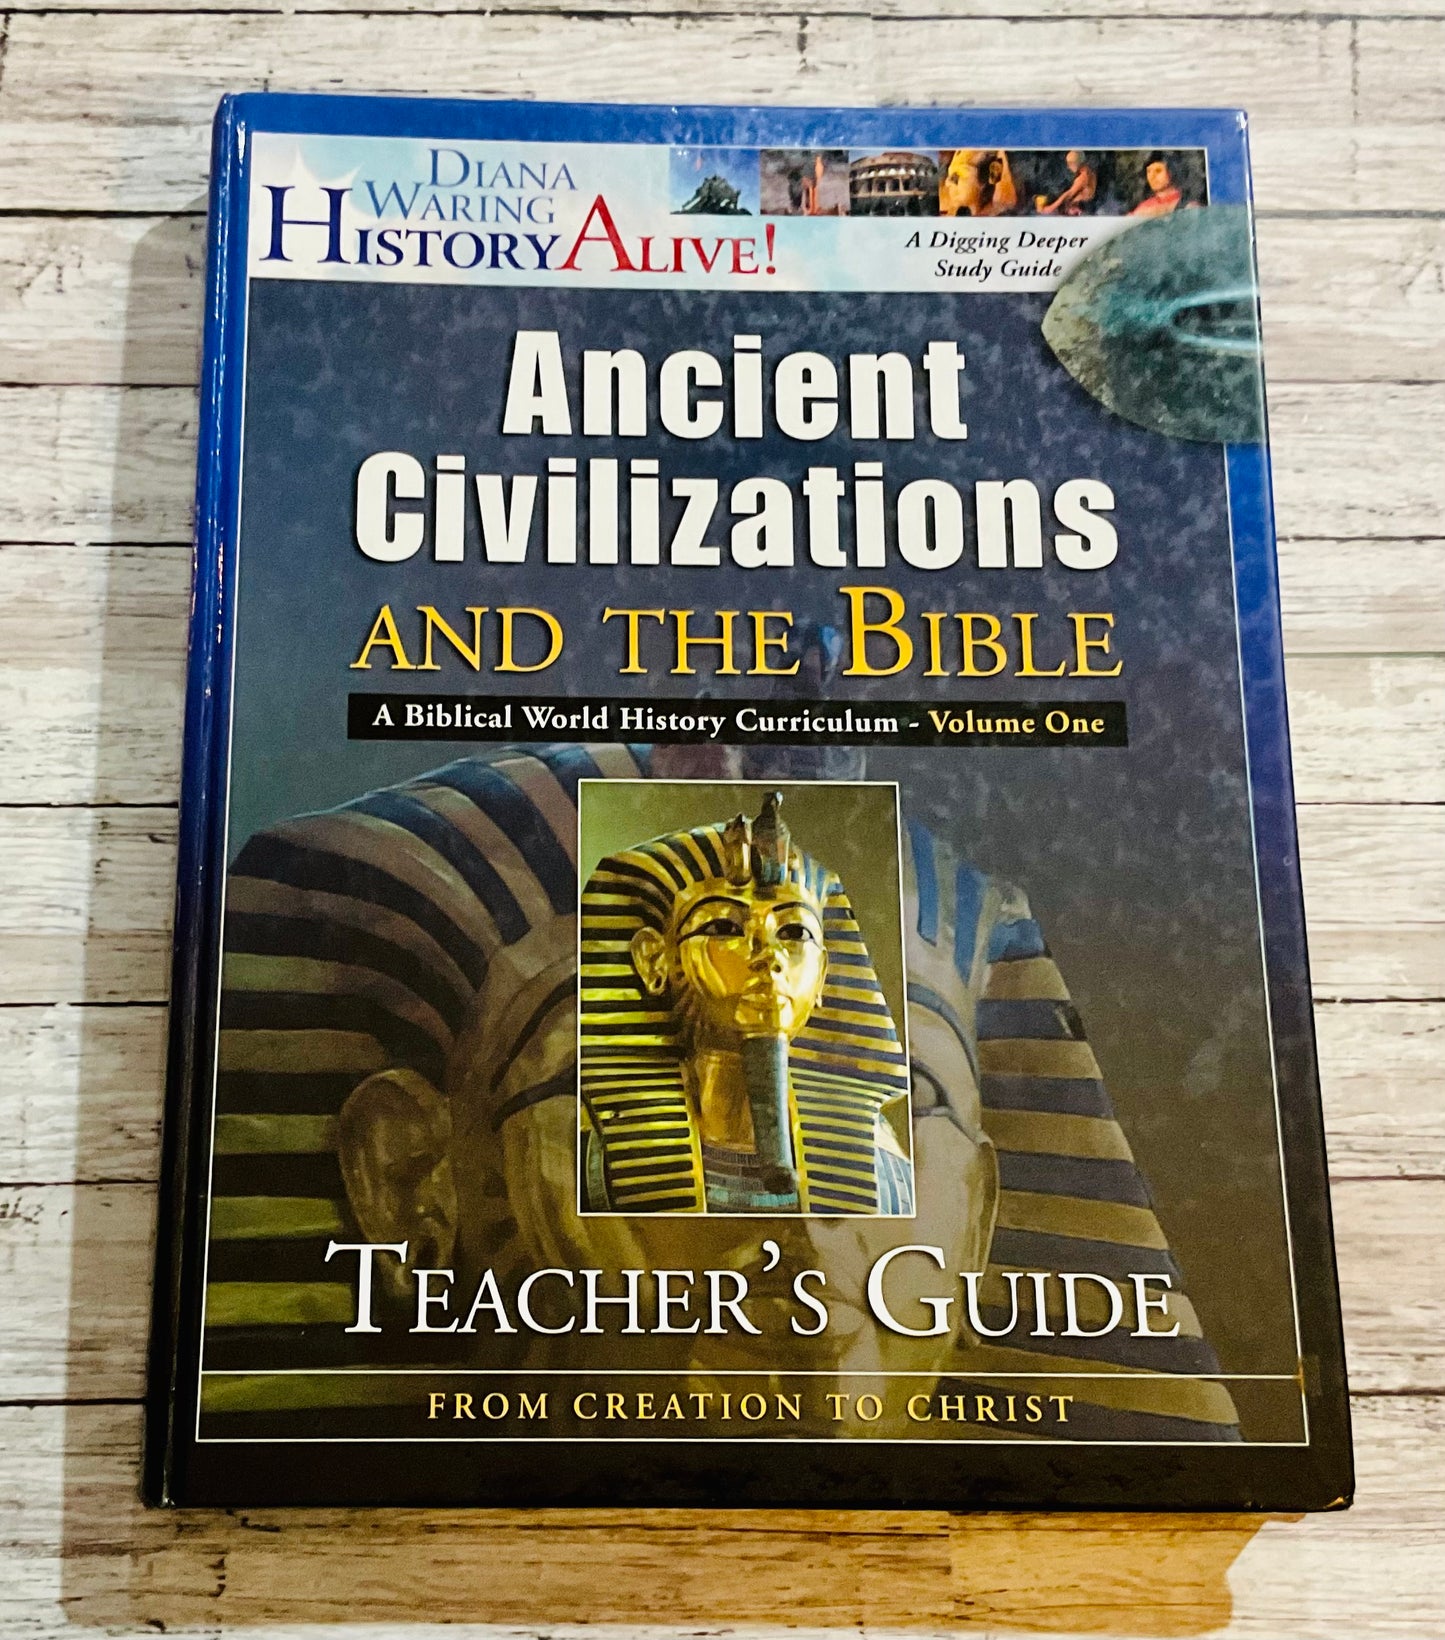 Ancient Civilizations and the Bible Teacher's Guide - Anchored Homeschool Resource Center